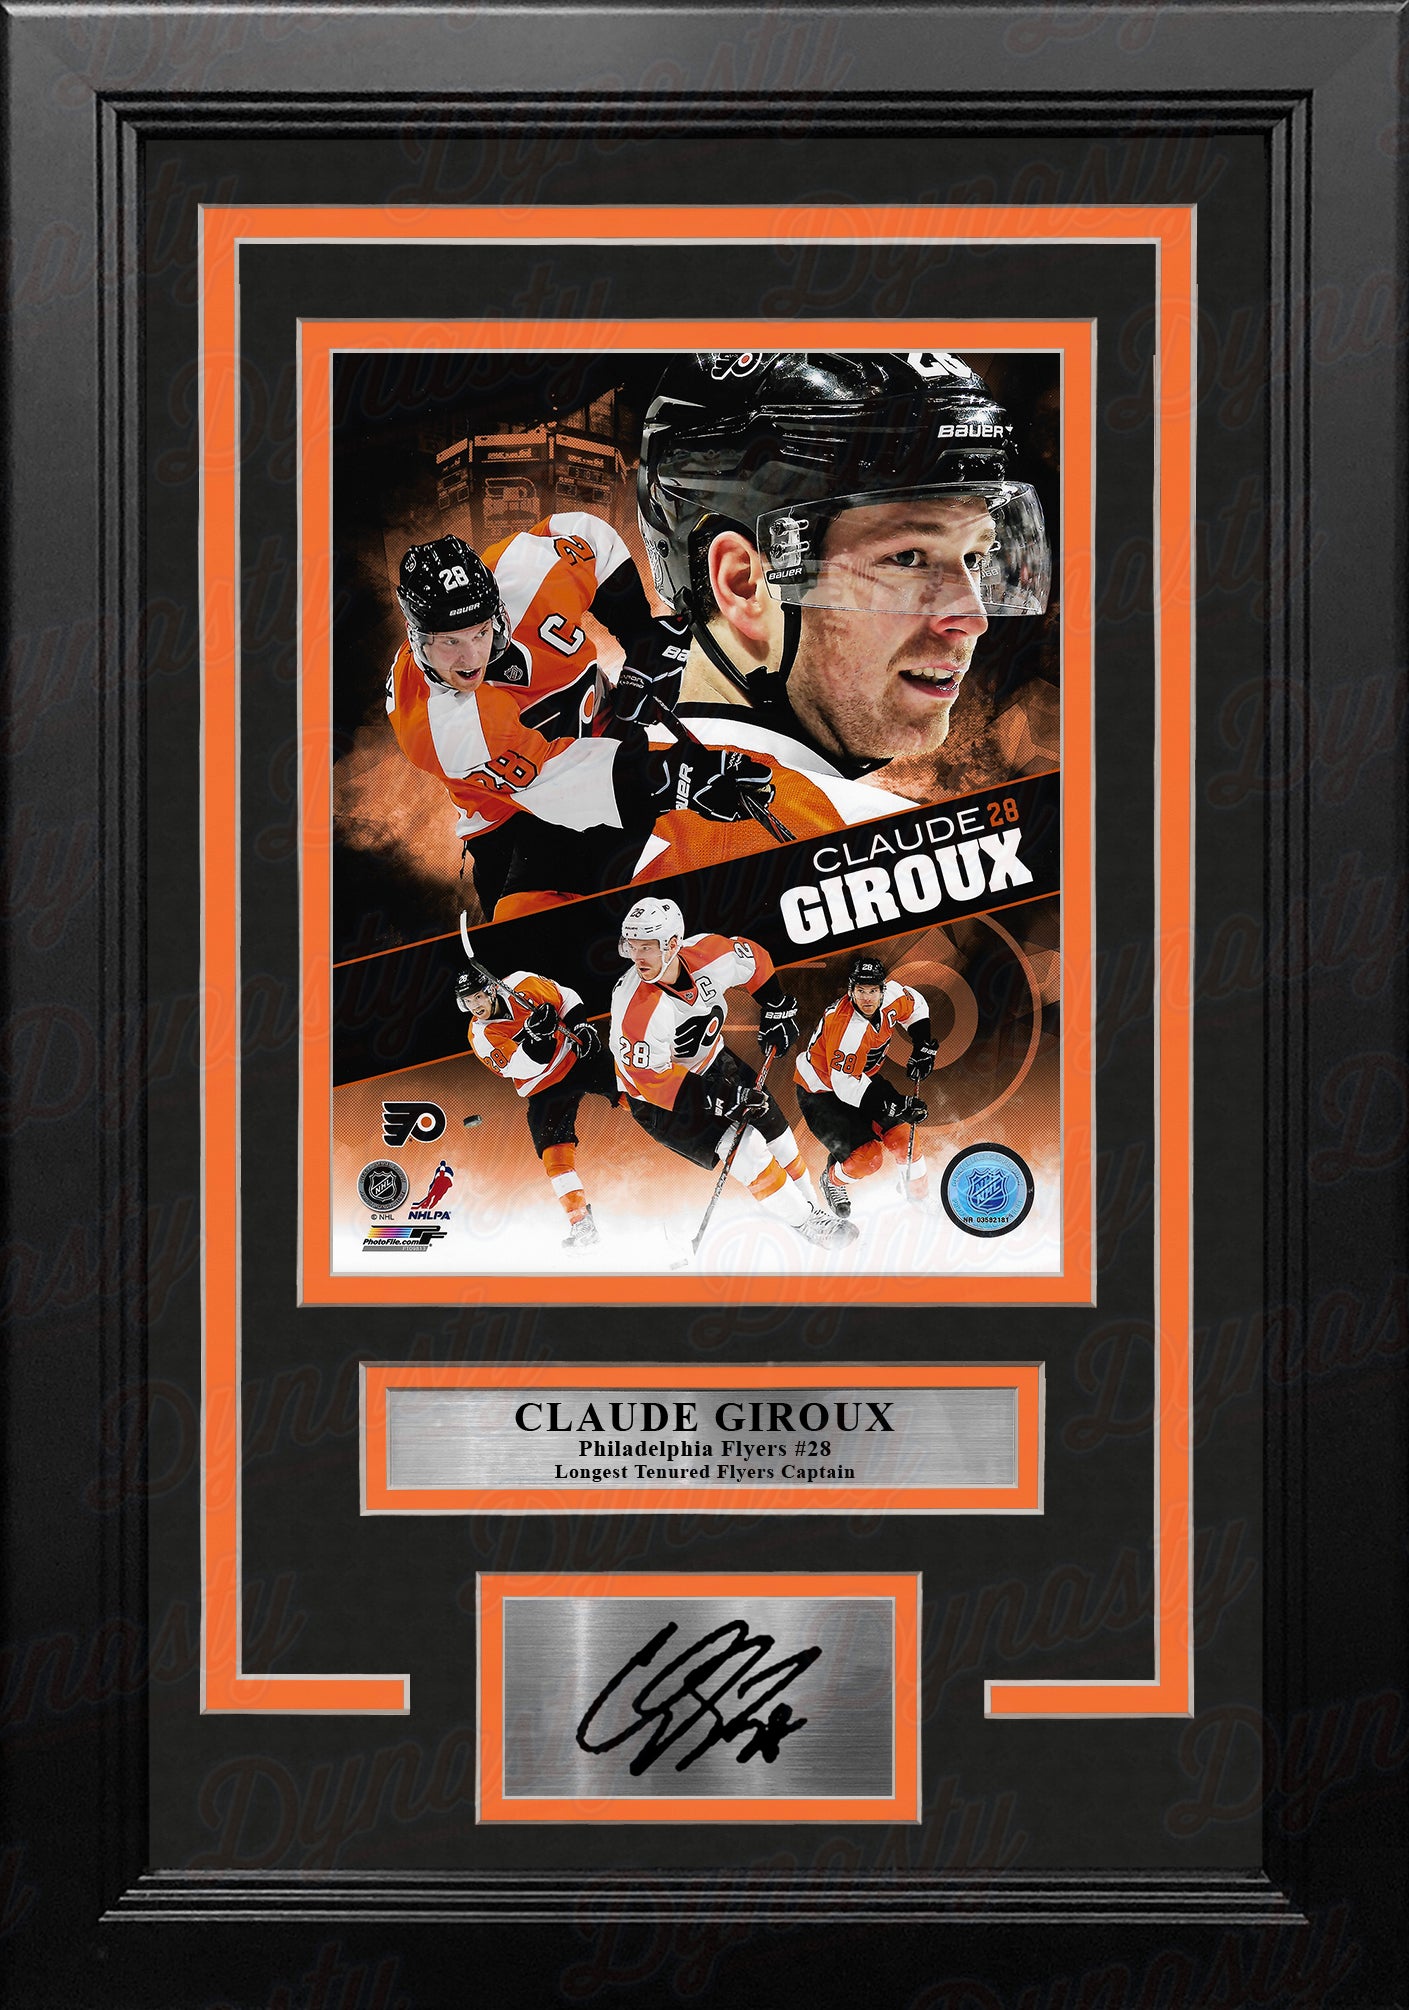 Claude Giroux Philadelphia Flyers 8" x 10" Framed Hockey Collage Photo with Engraved Autograph - Dynasty Sports & Framing 